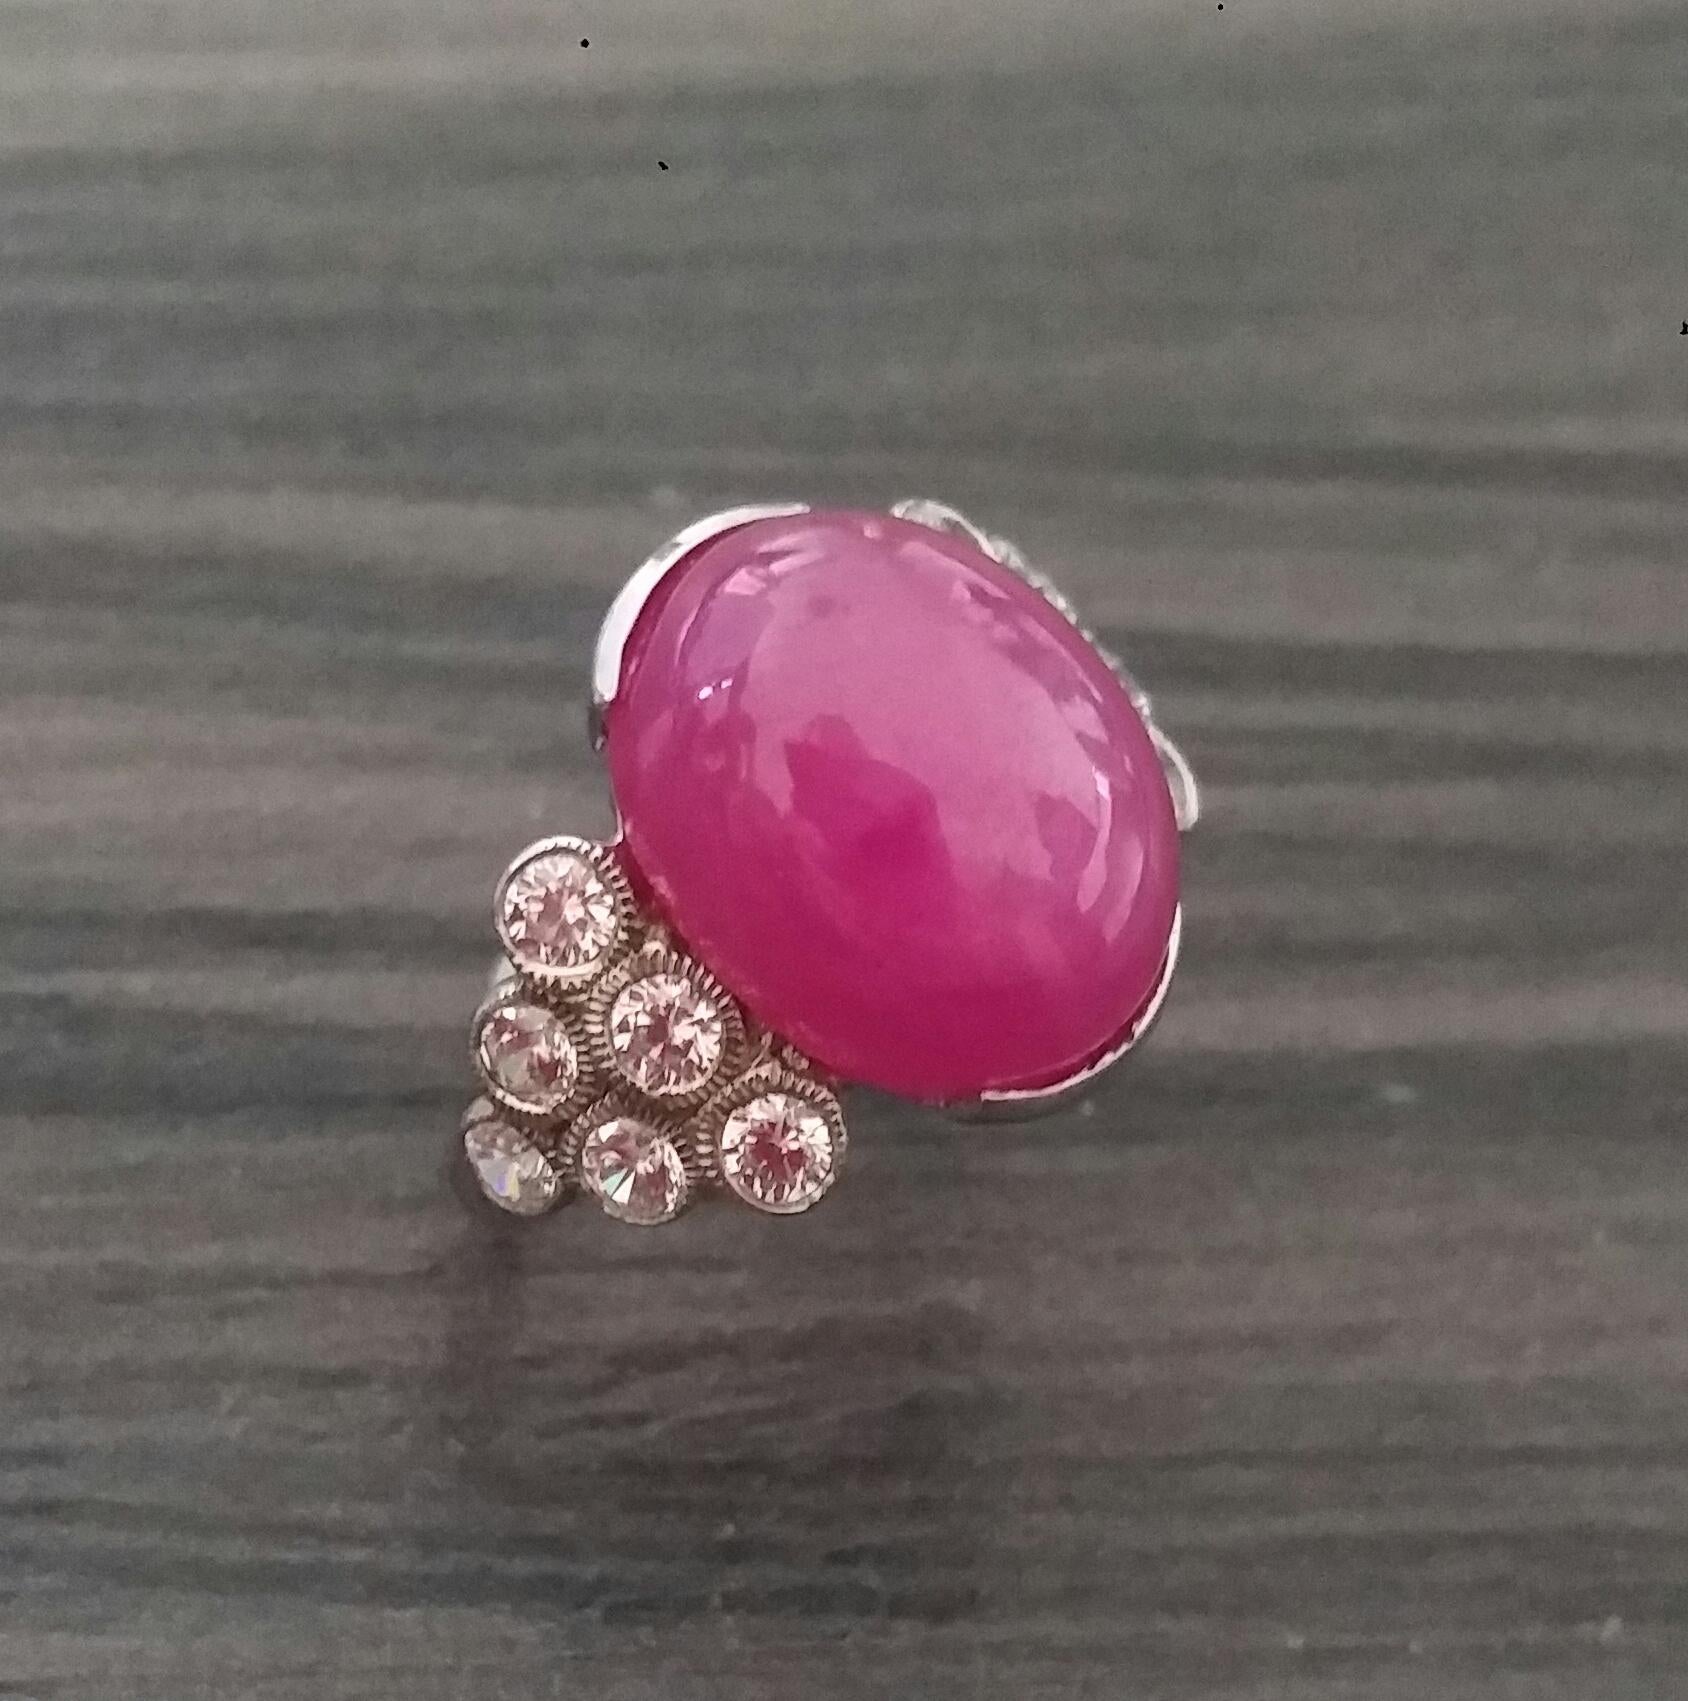 13 Carats Natural Ruby oval cabochon ( 11 mm. x 15 mm.) set with 3,7 grams of 14 kt white gold, 12 round full cut diamonds of 0,05 ct. each = 0,6 carats total diamonds weight
Ring Shank American size # 7 1/2
Height 25 mm
Weight 5,20 grams
In 1978